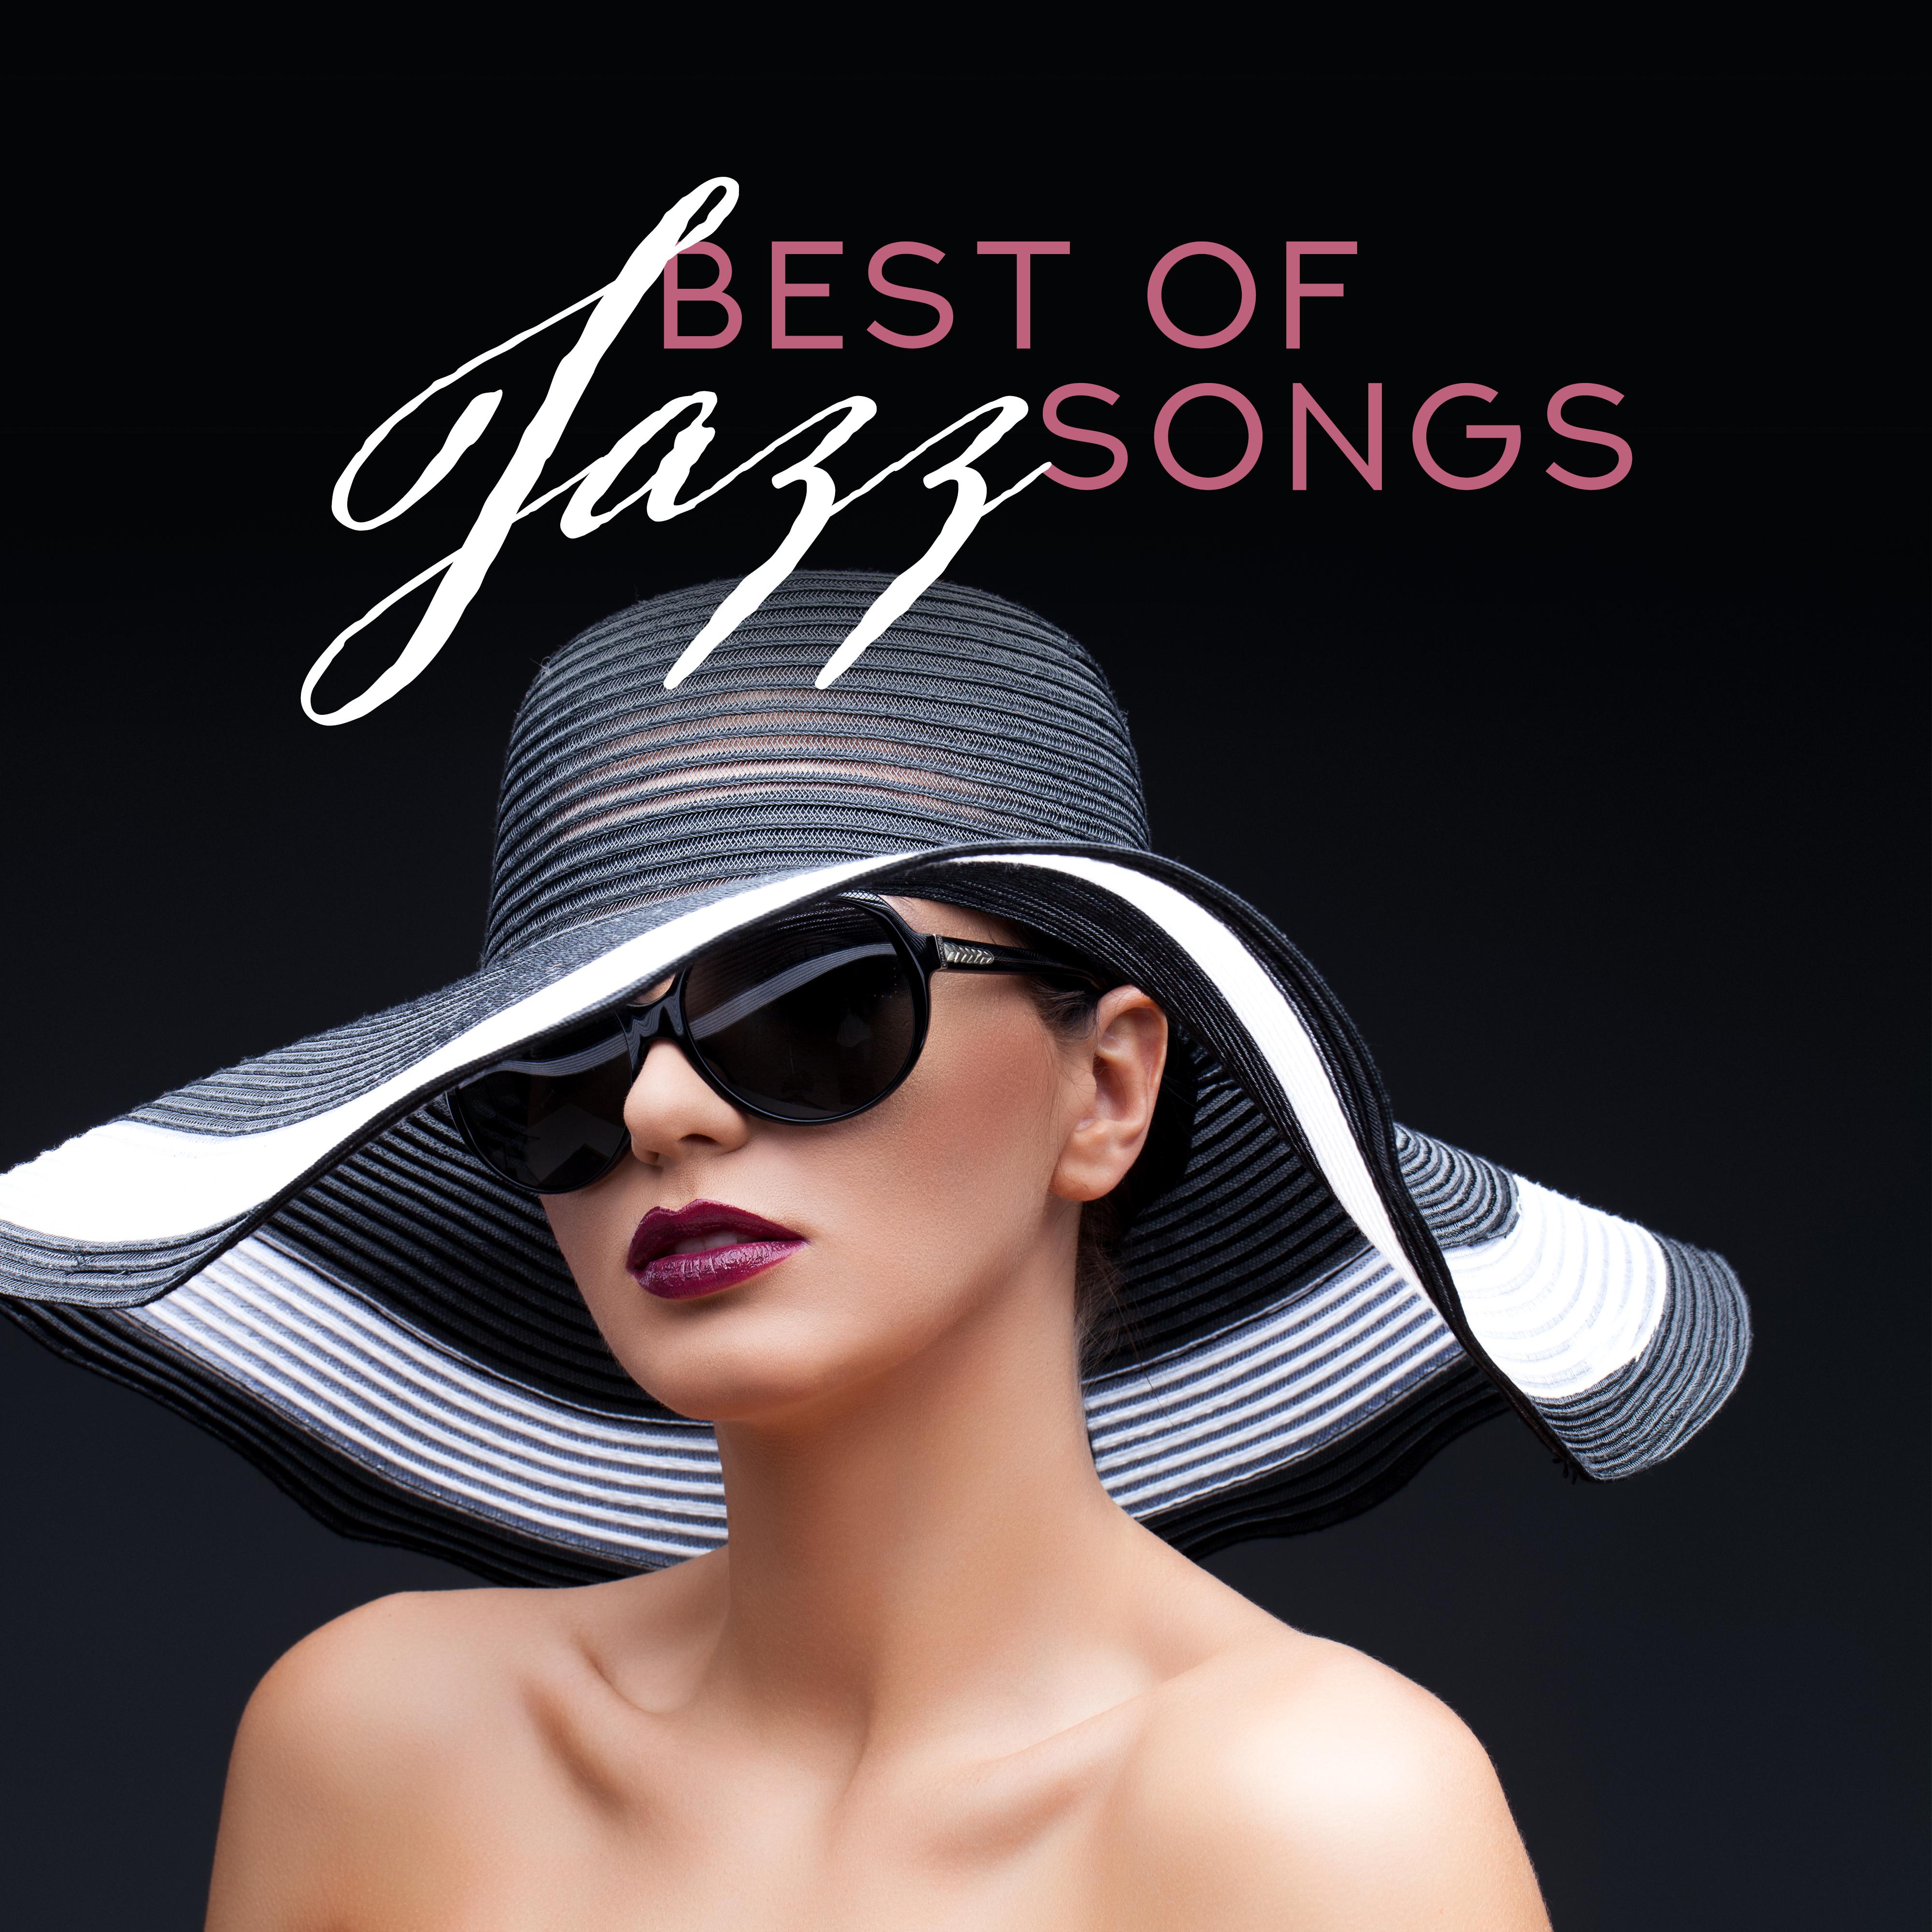 Best of Jazz Songs: Jazz Coffee, Relaxing Music to Calm Down, Lounge, Jazz Music Ambient, Restaurant Background Jazz